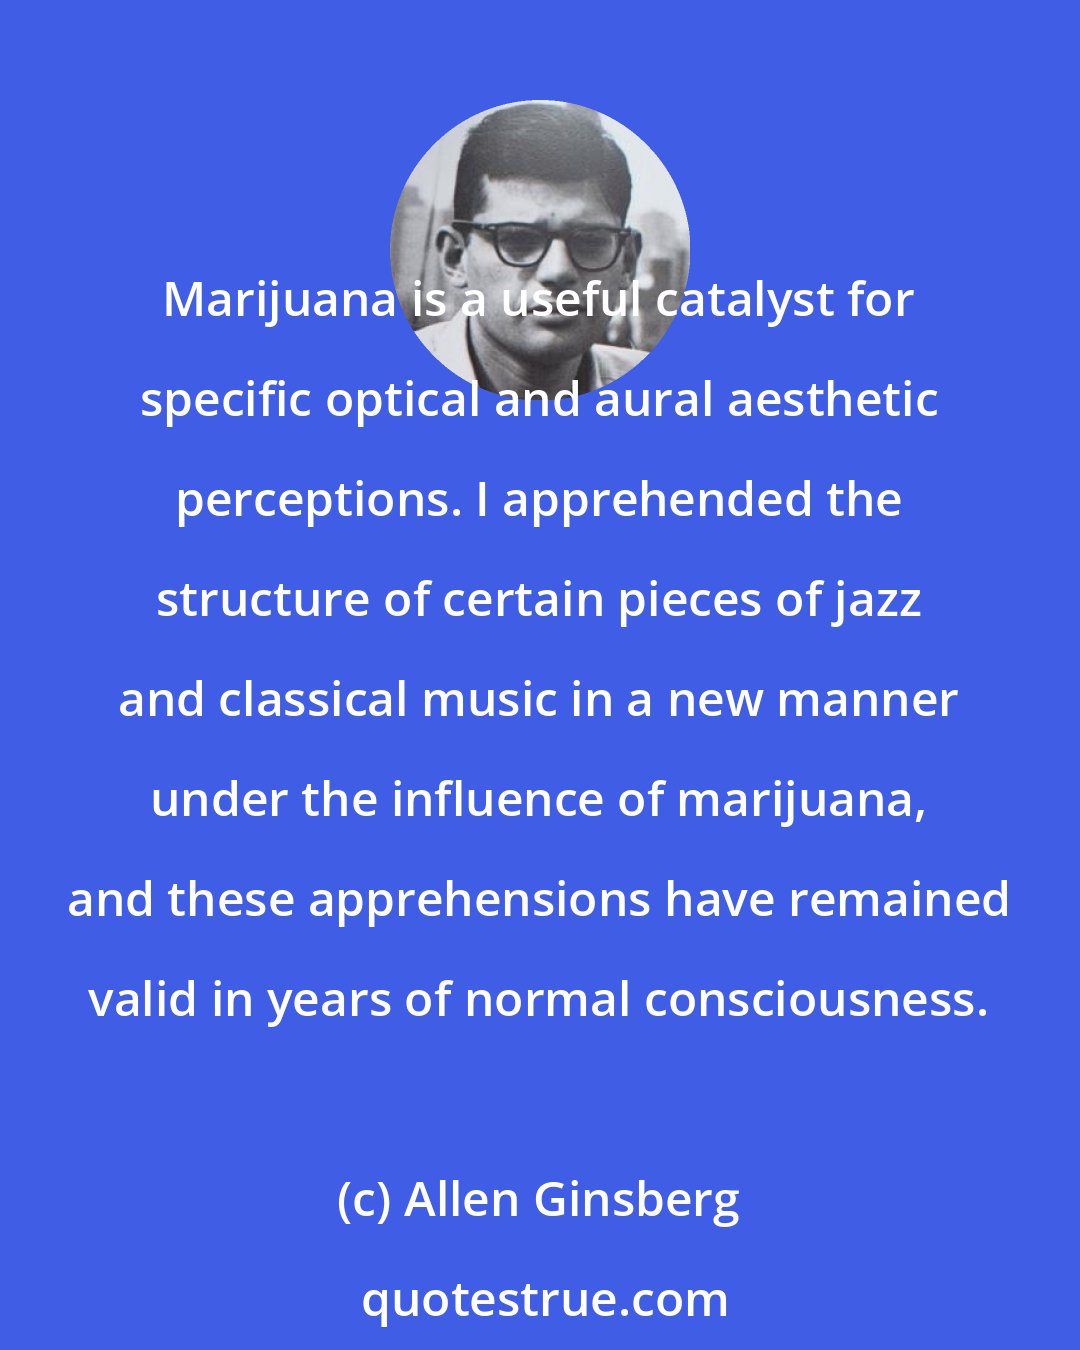 Allen Ginsberg: Marijuana is a useful catalyst for specific optical and aural aesthetic perceptions. I apprehended the structure of certain pieces of jazz and classical music in a new manner under the influence of marijuana, and these apprehensions have remained valid in years of normal consciousness.